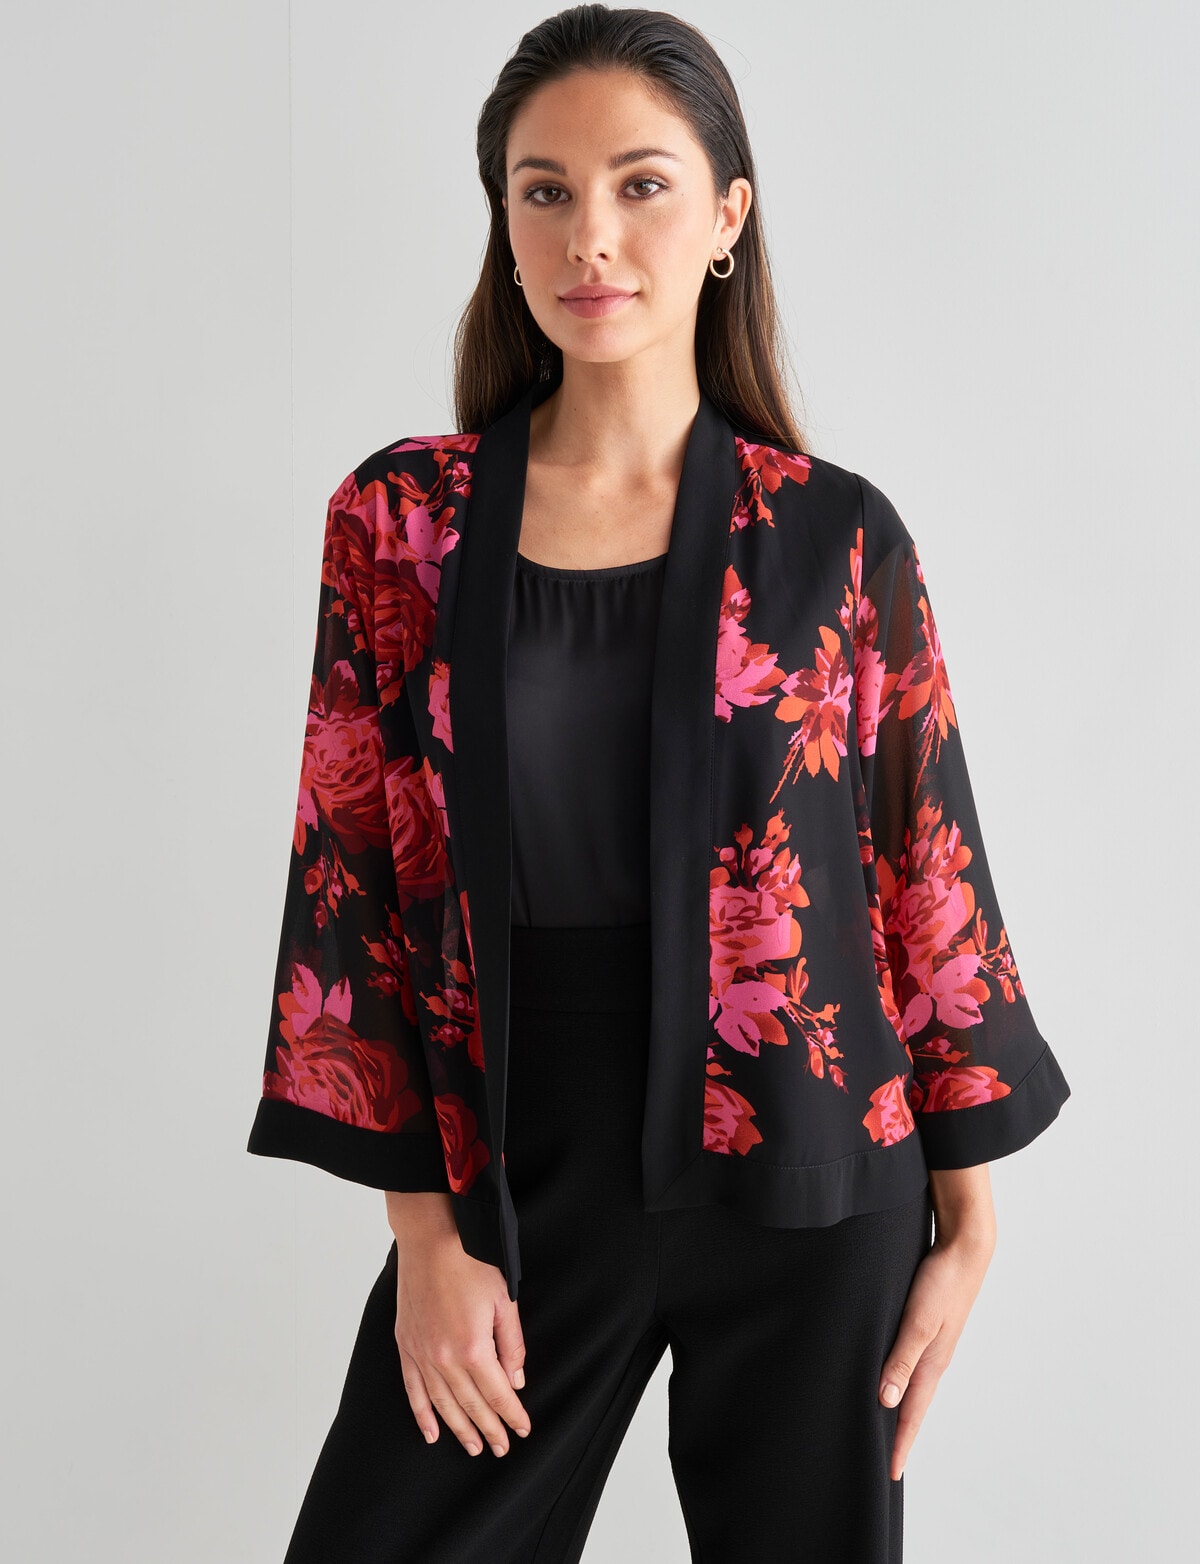 Whistle Floral Woven Jacket, Pink & Black - Coats & Jackets